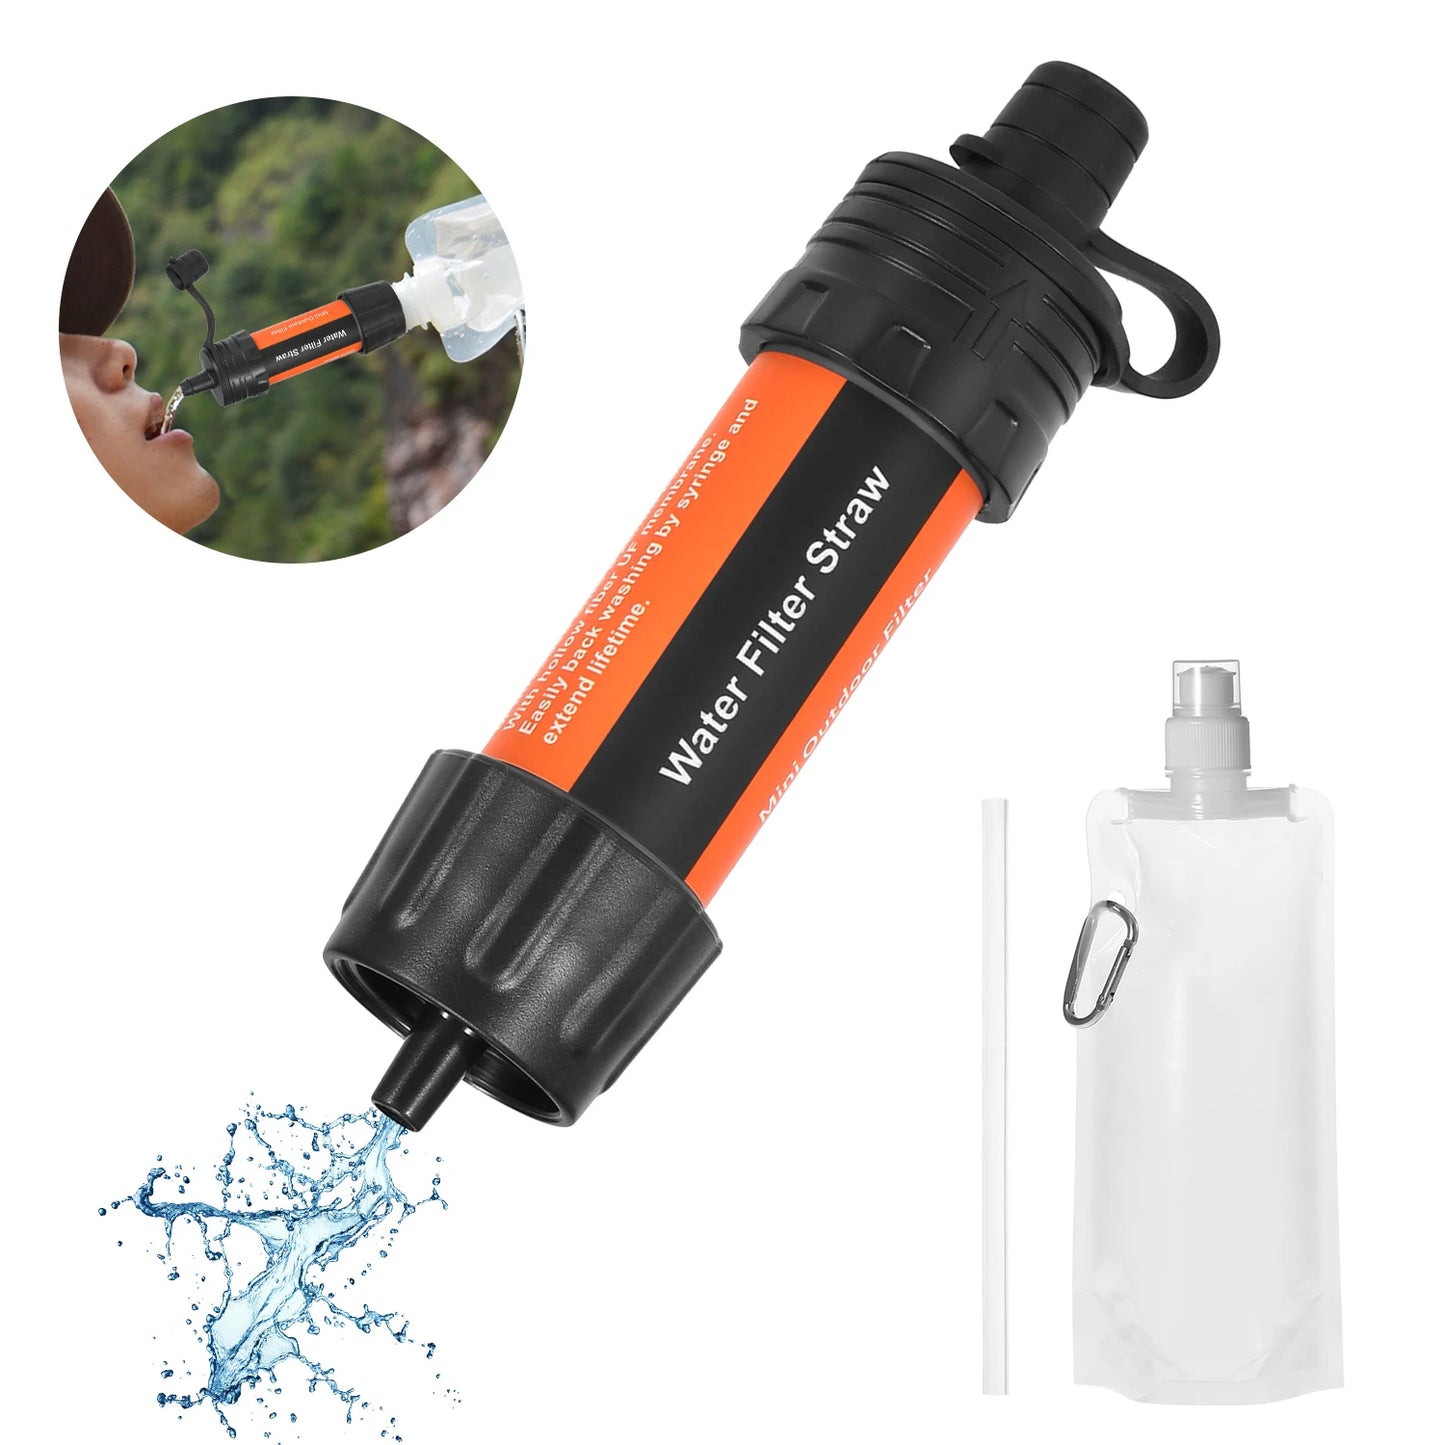 Outdoor Water Filter System 5000 Liters Water Filtration Straw Water Purifier for Emergency Survival Tool Camping Equipment